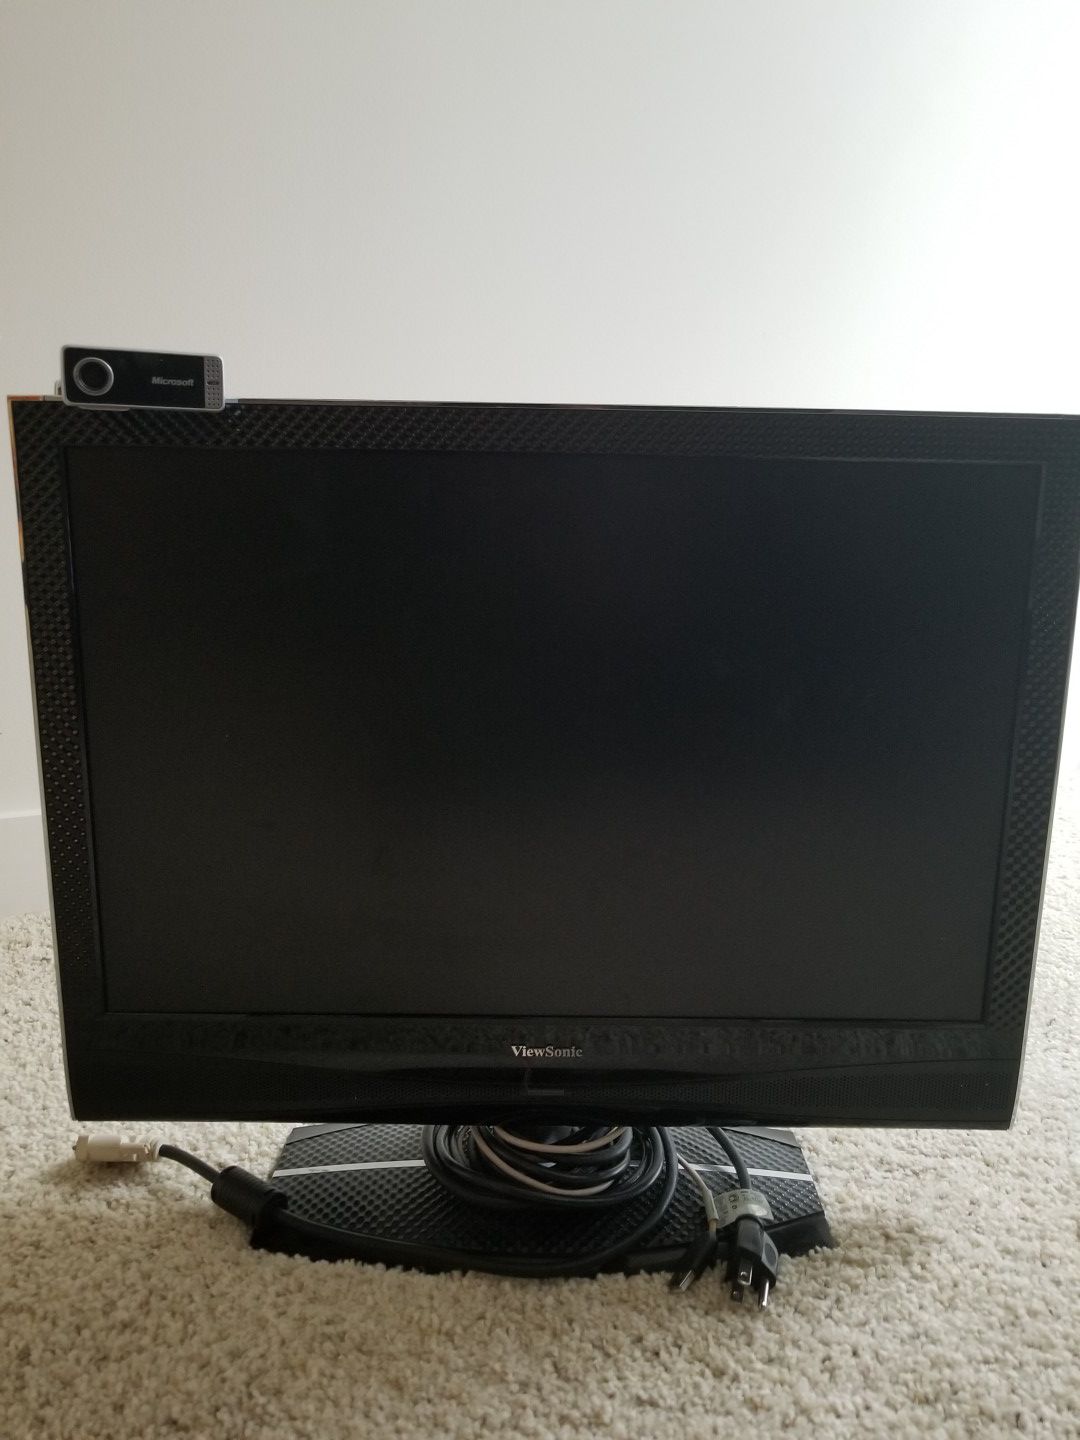 32' View sonic computer monitor